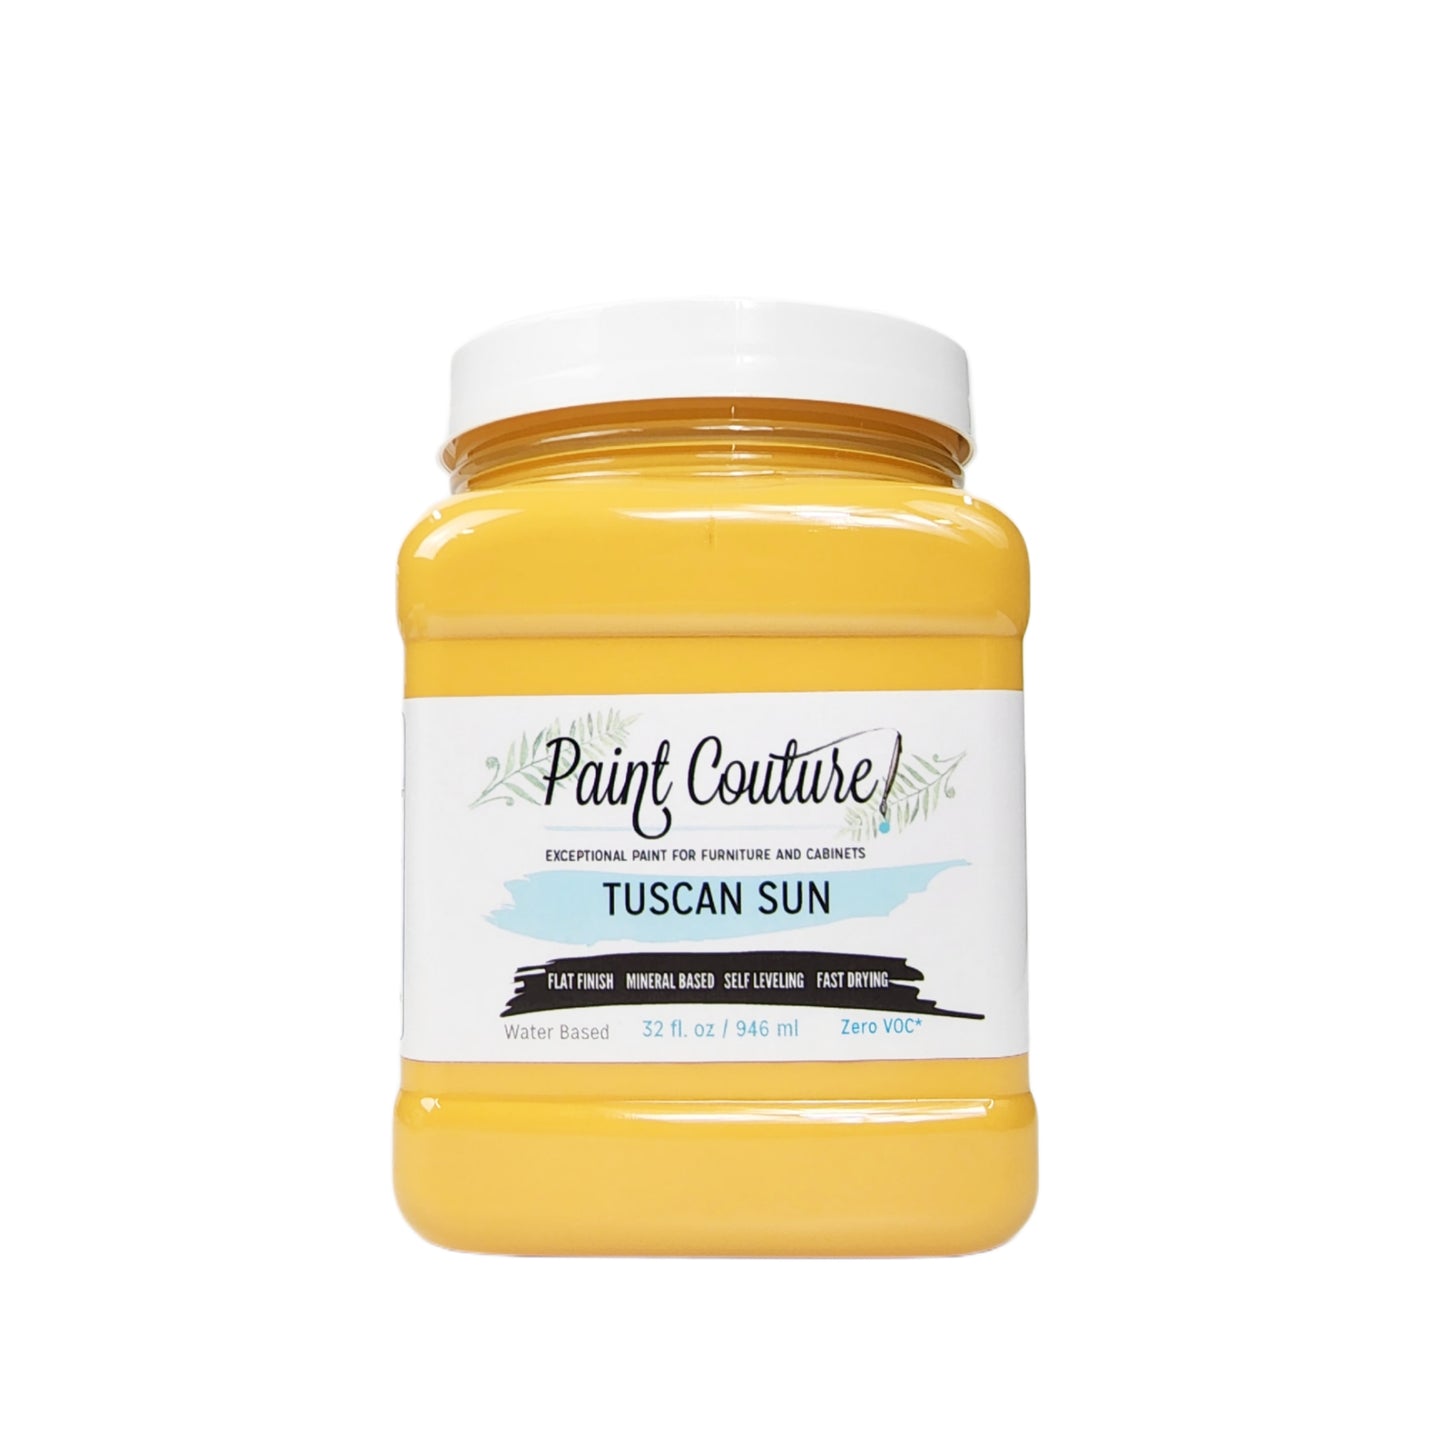 Paint Couture Tuscan Sun